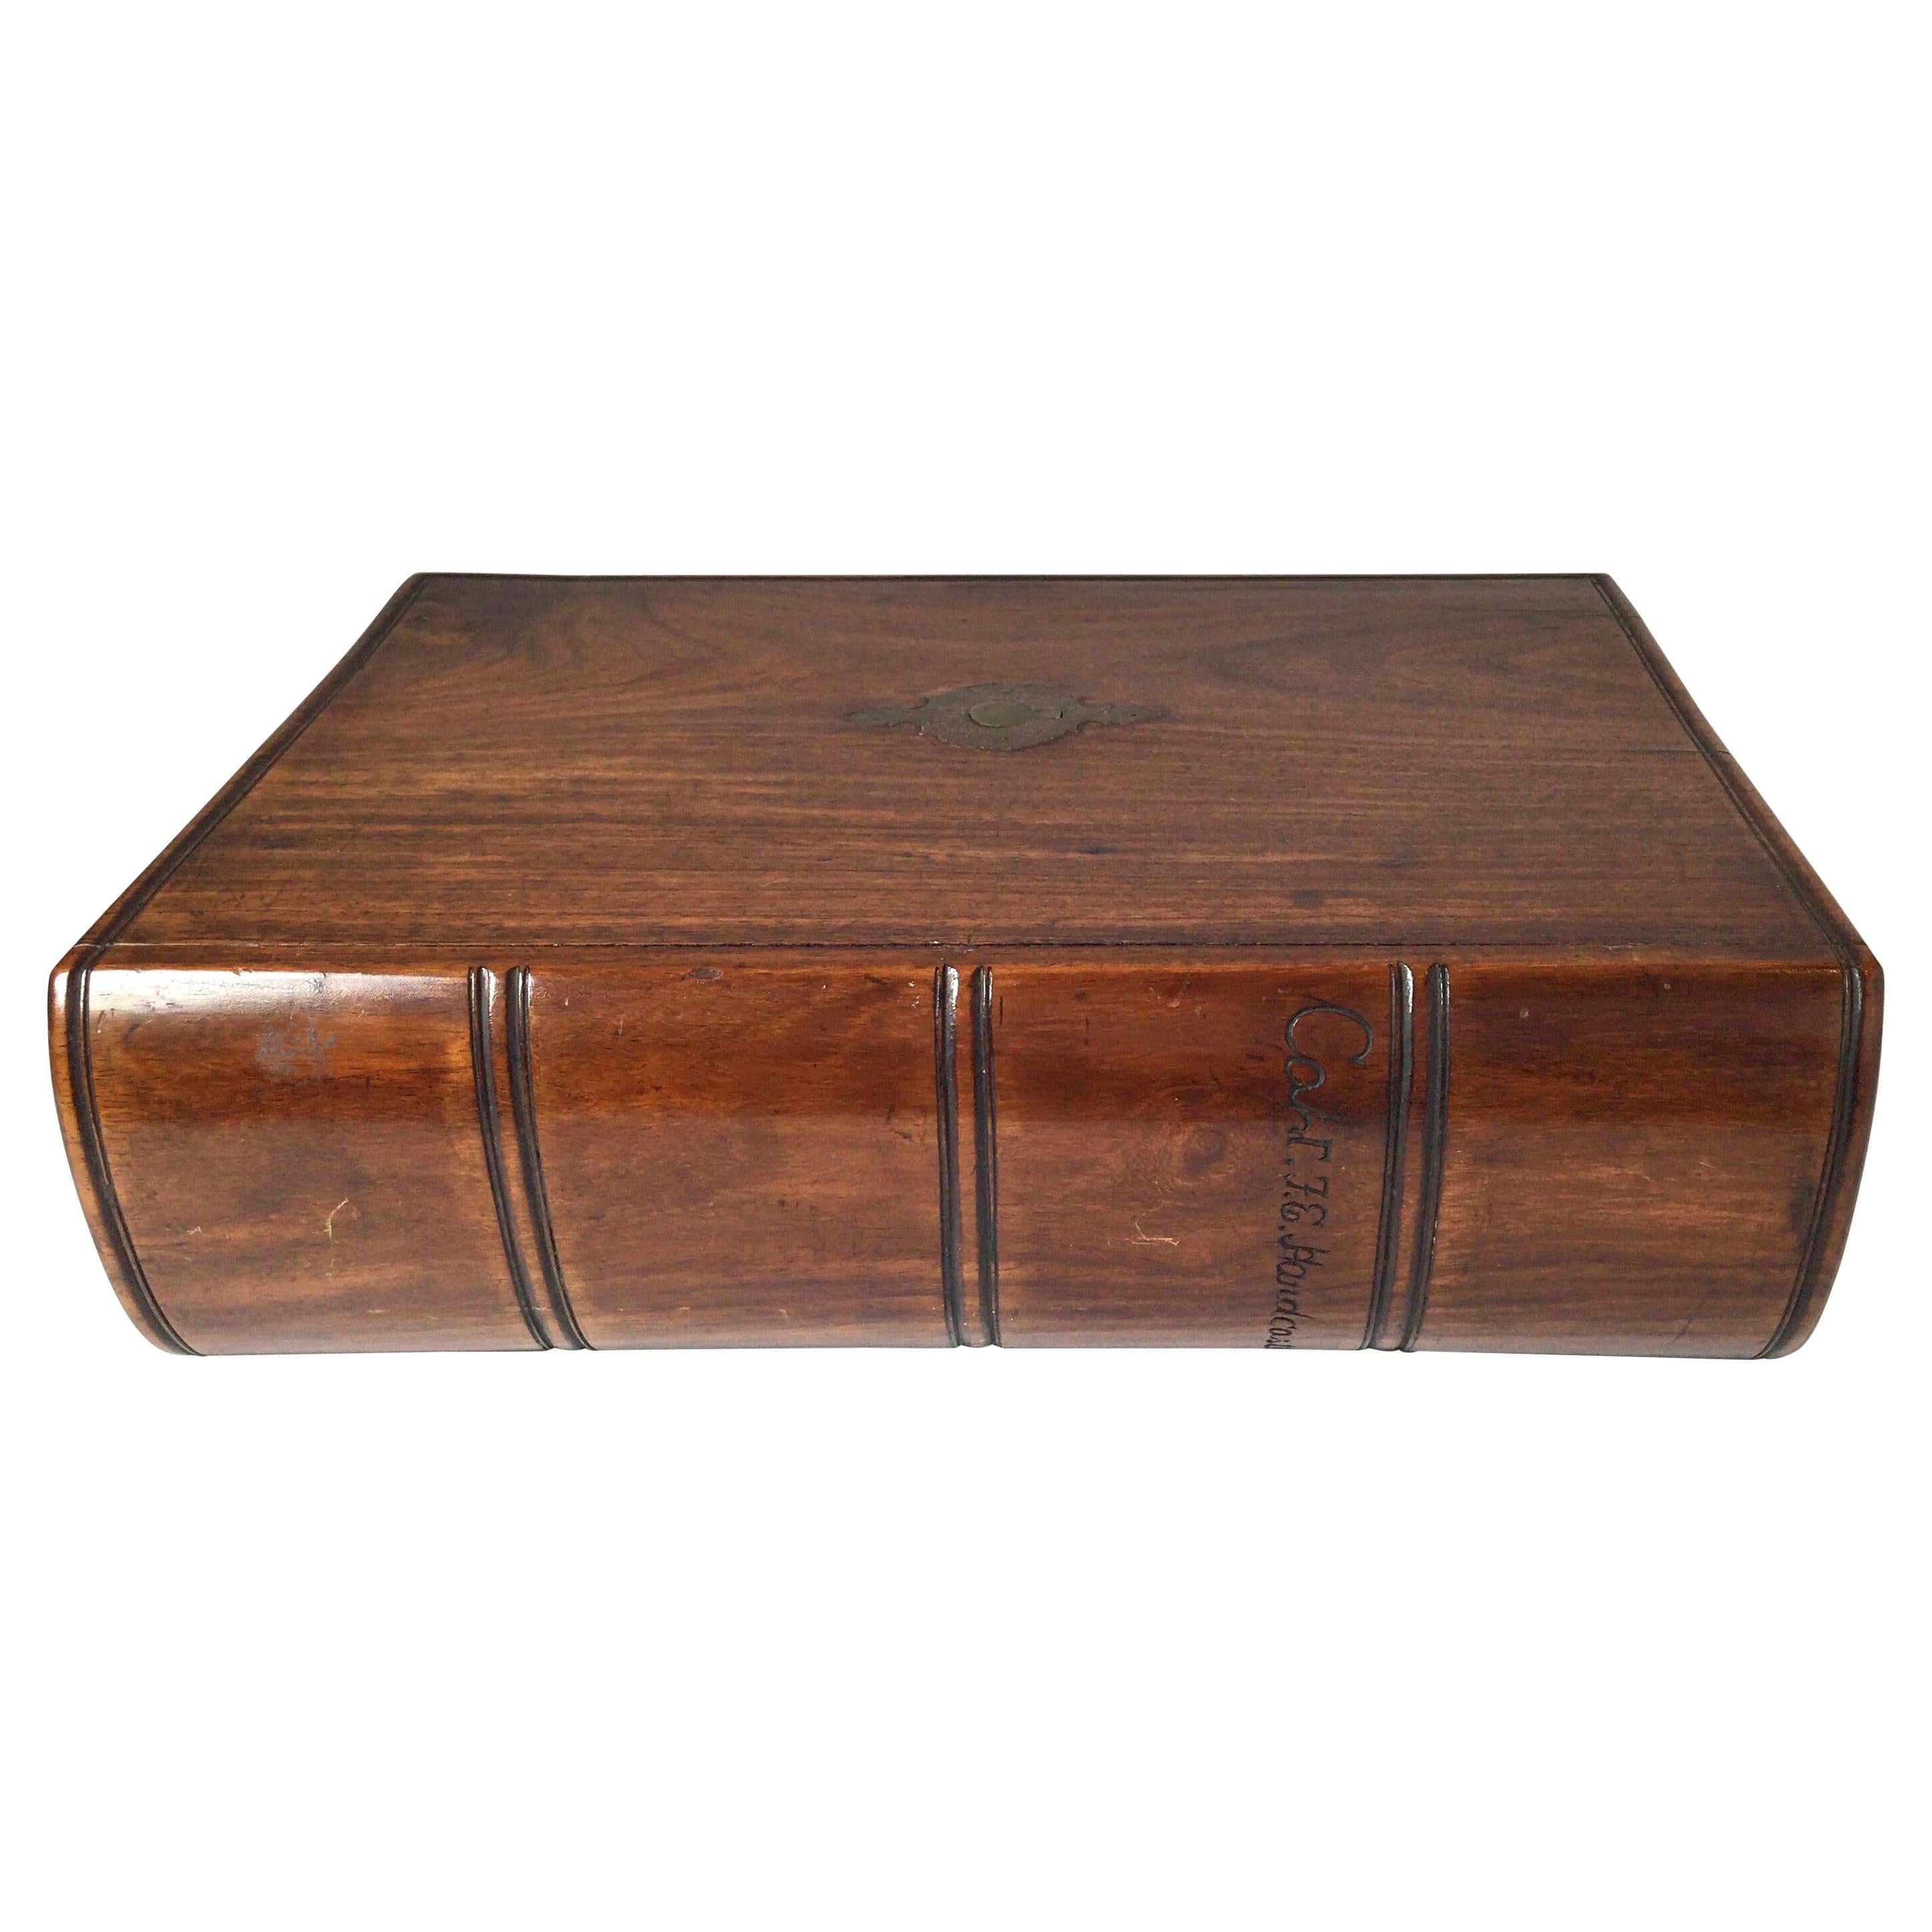 Mid 19th Century Captains Hand Carved Walnut Lap Desk Book Box With Key Lock